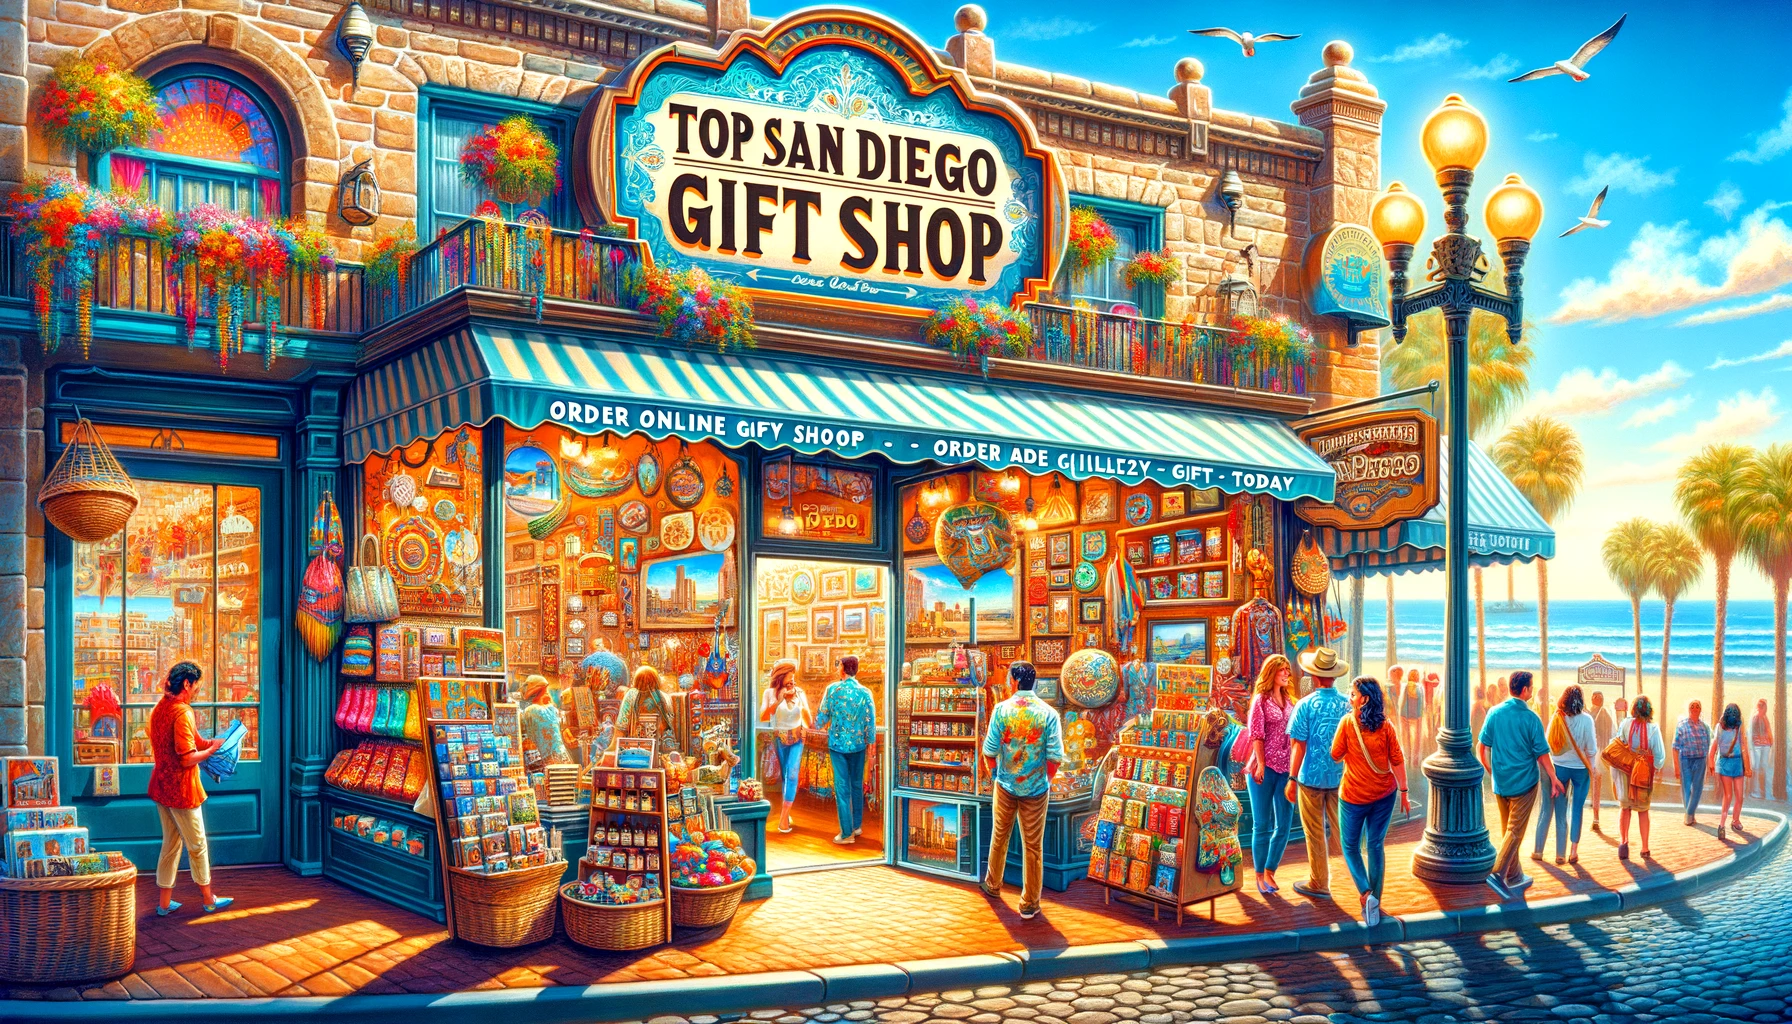 A lively San Diego gift shop with diverse customers browsing unique local products.